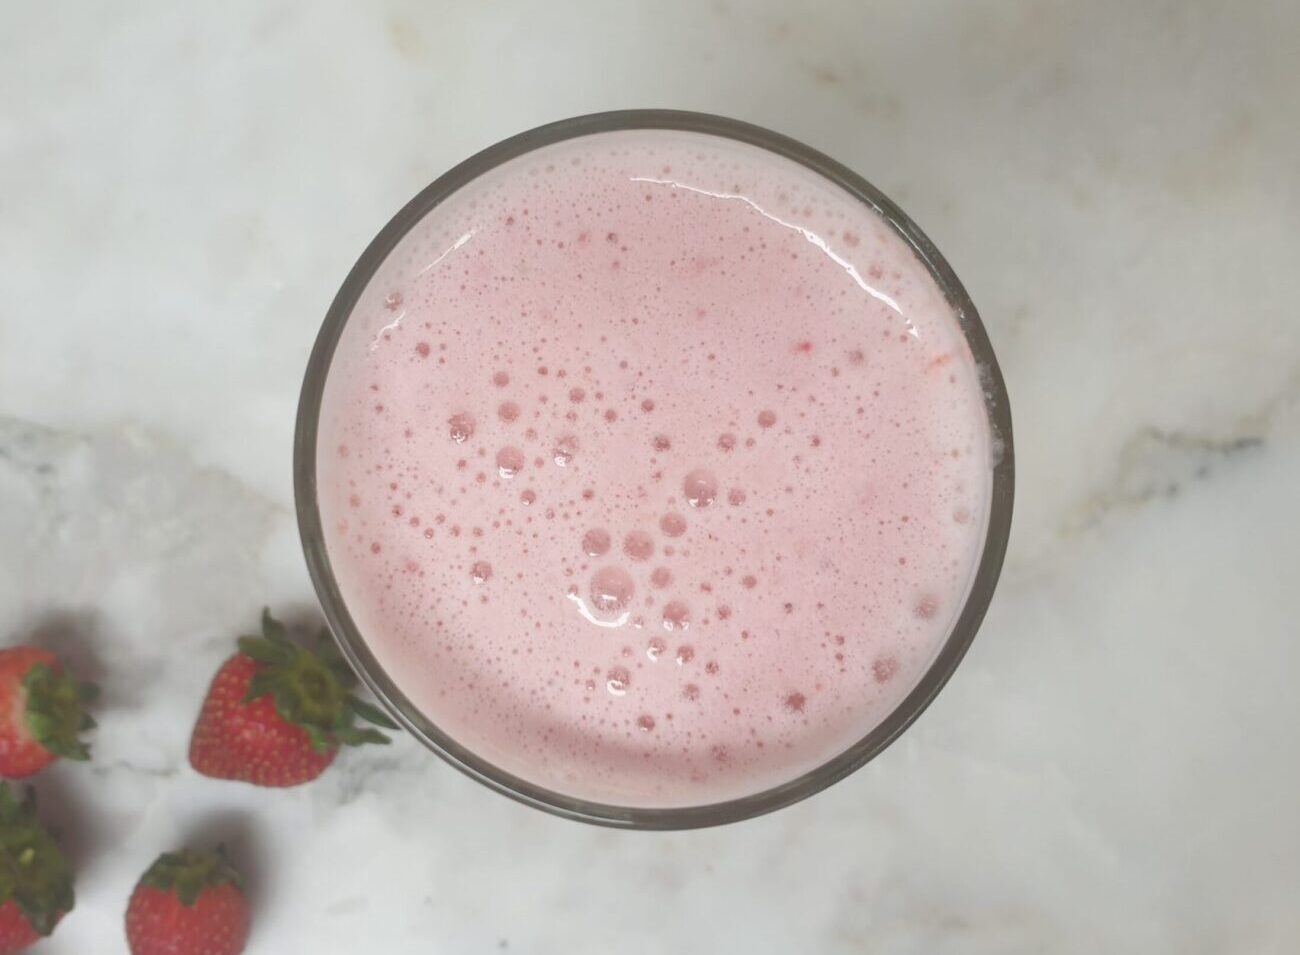 Low Carb Strawberry Smoothie